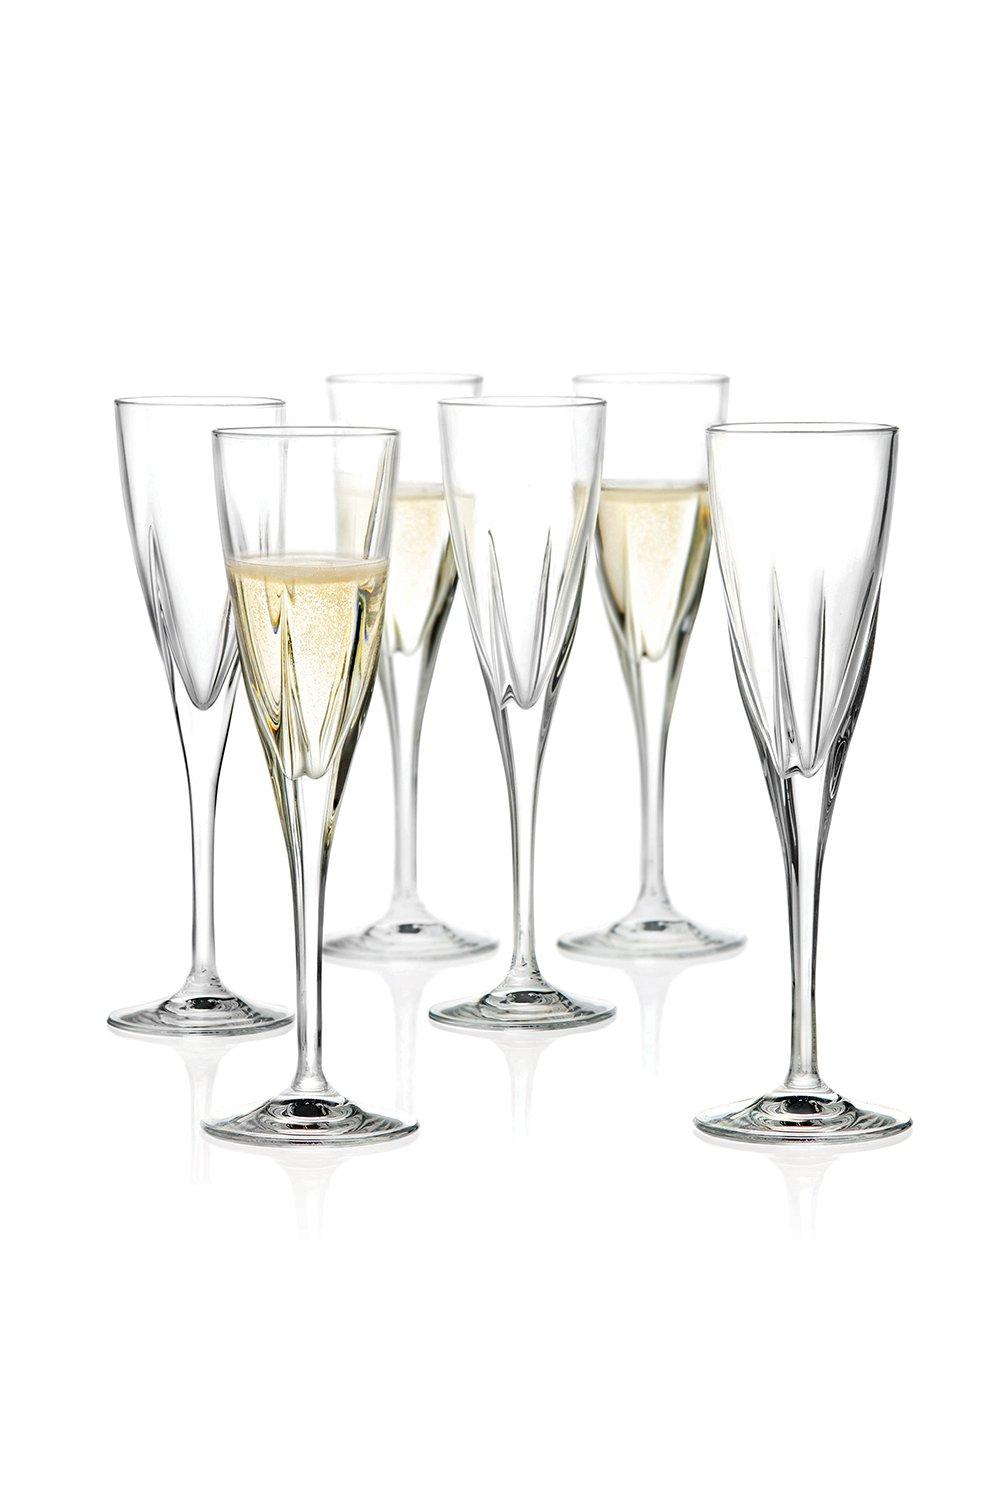 6 Piece 'Fusion' Luxion Crystal Champagne Glass Set